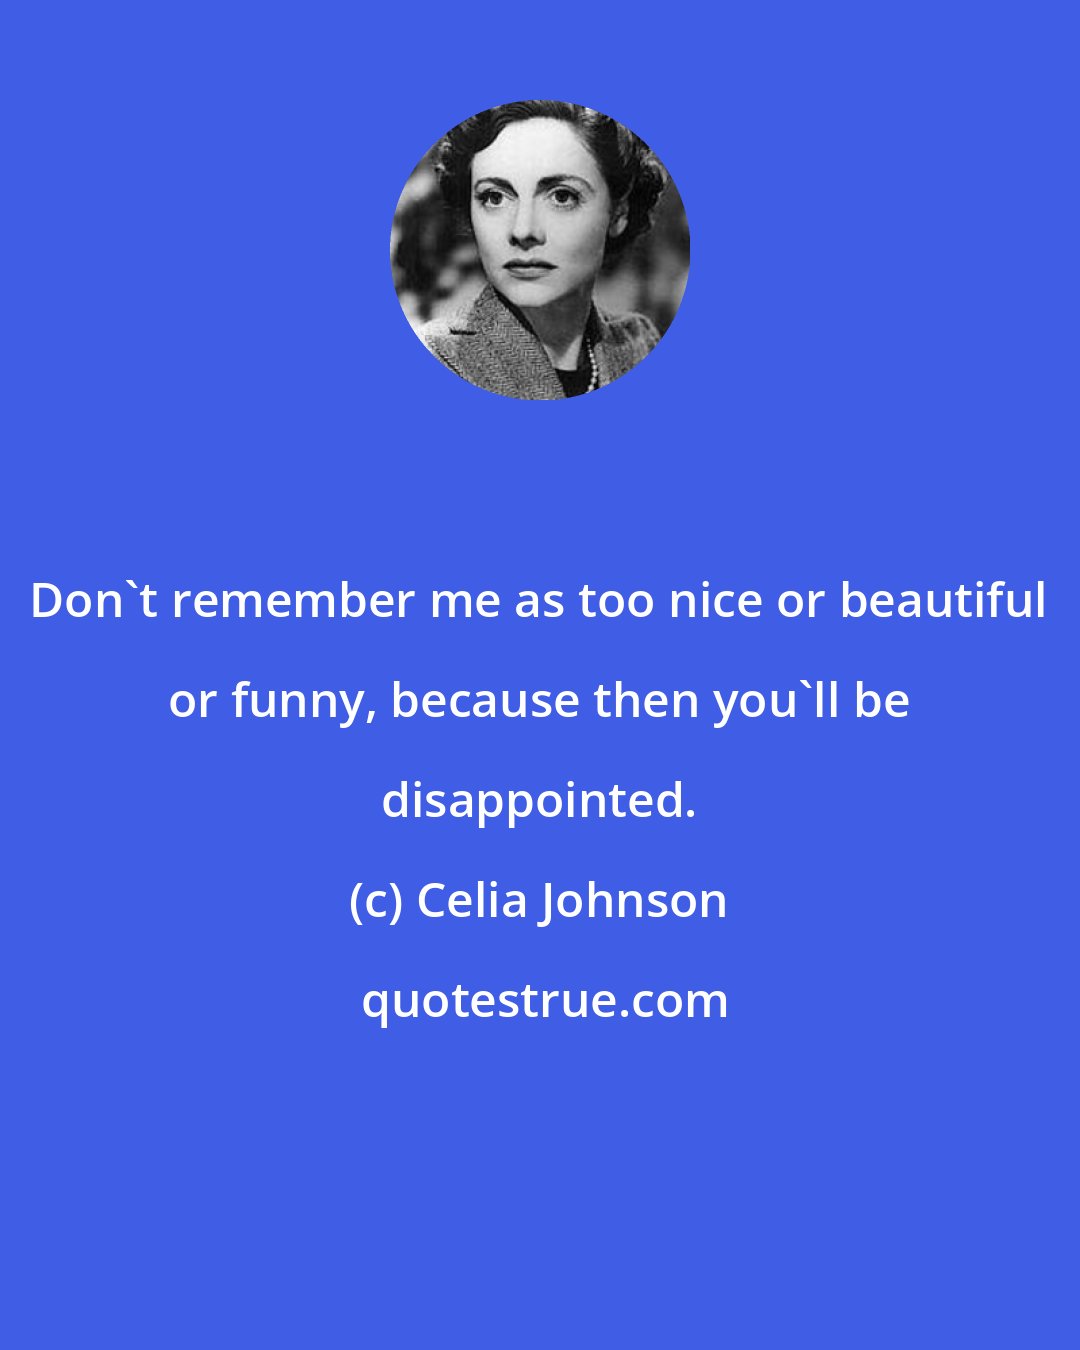 Celia Johnson: Don't remember me as too nice or beautiful or funny, because then you'll be disappointed.